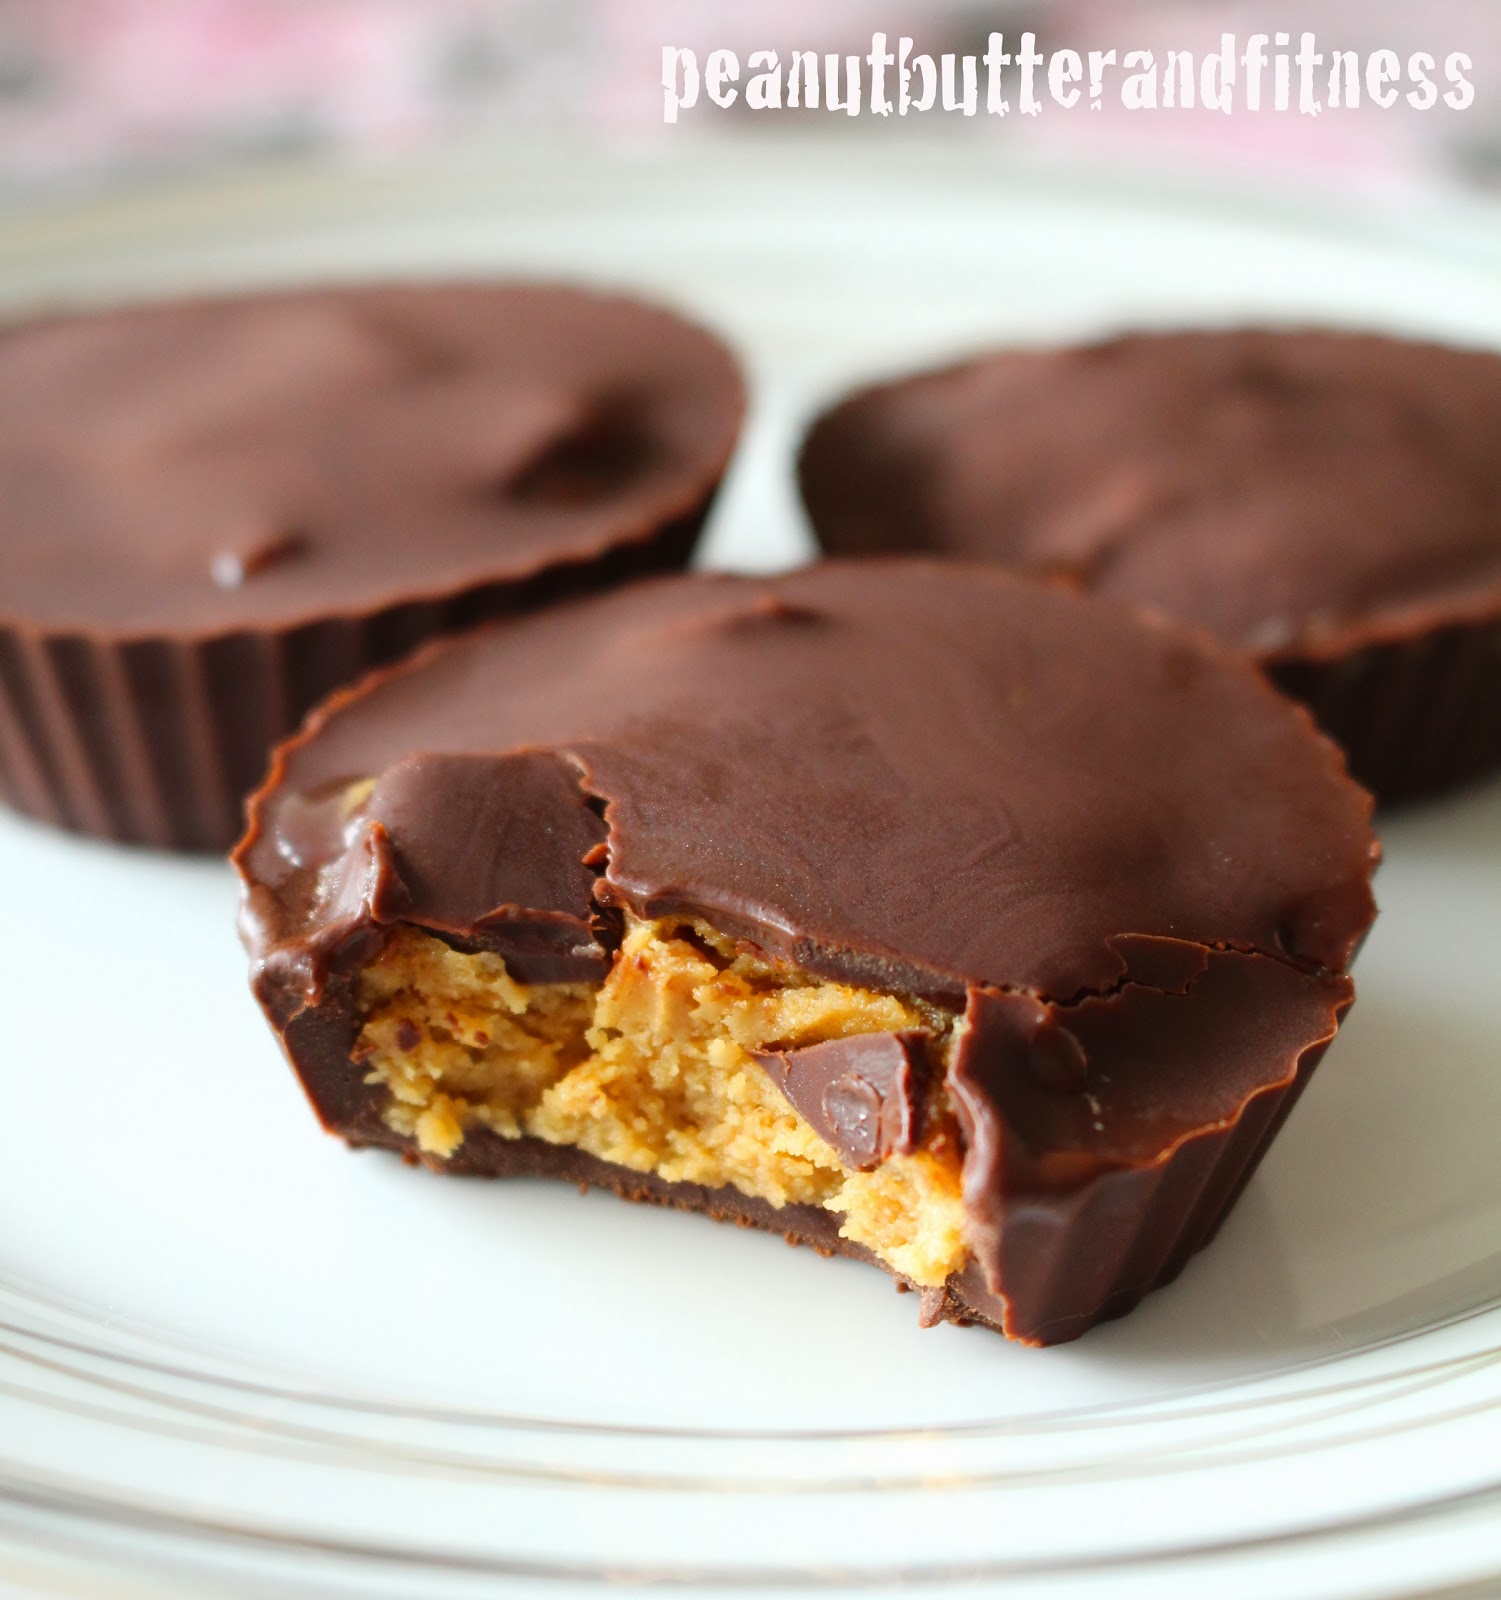 Chocolate Peanut Butter Protein Cups - Peanut Butter and Fitness